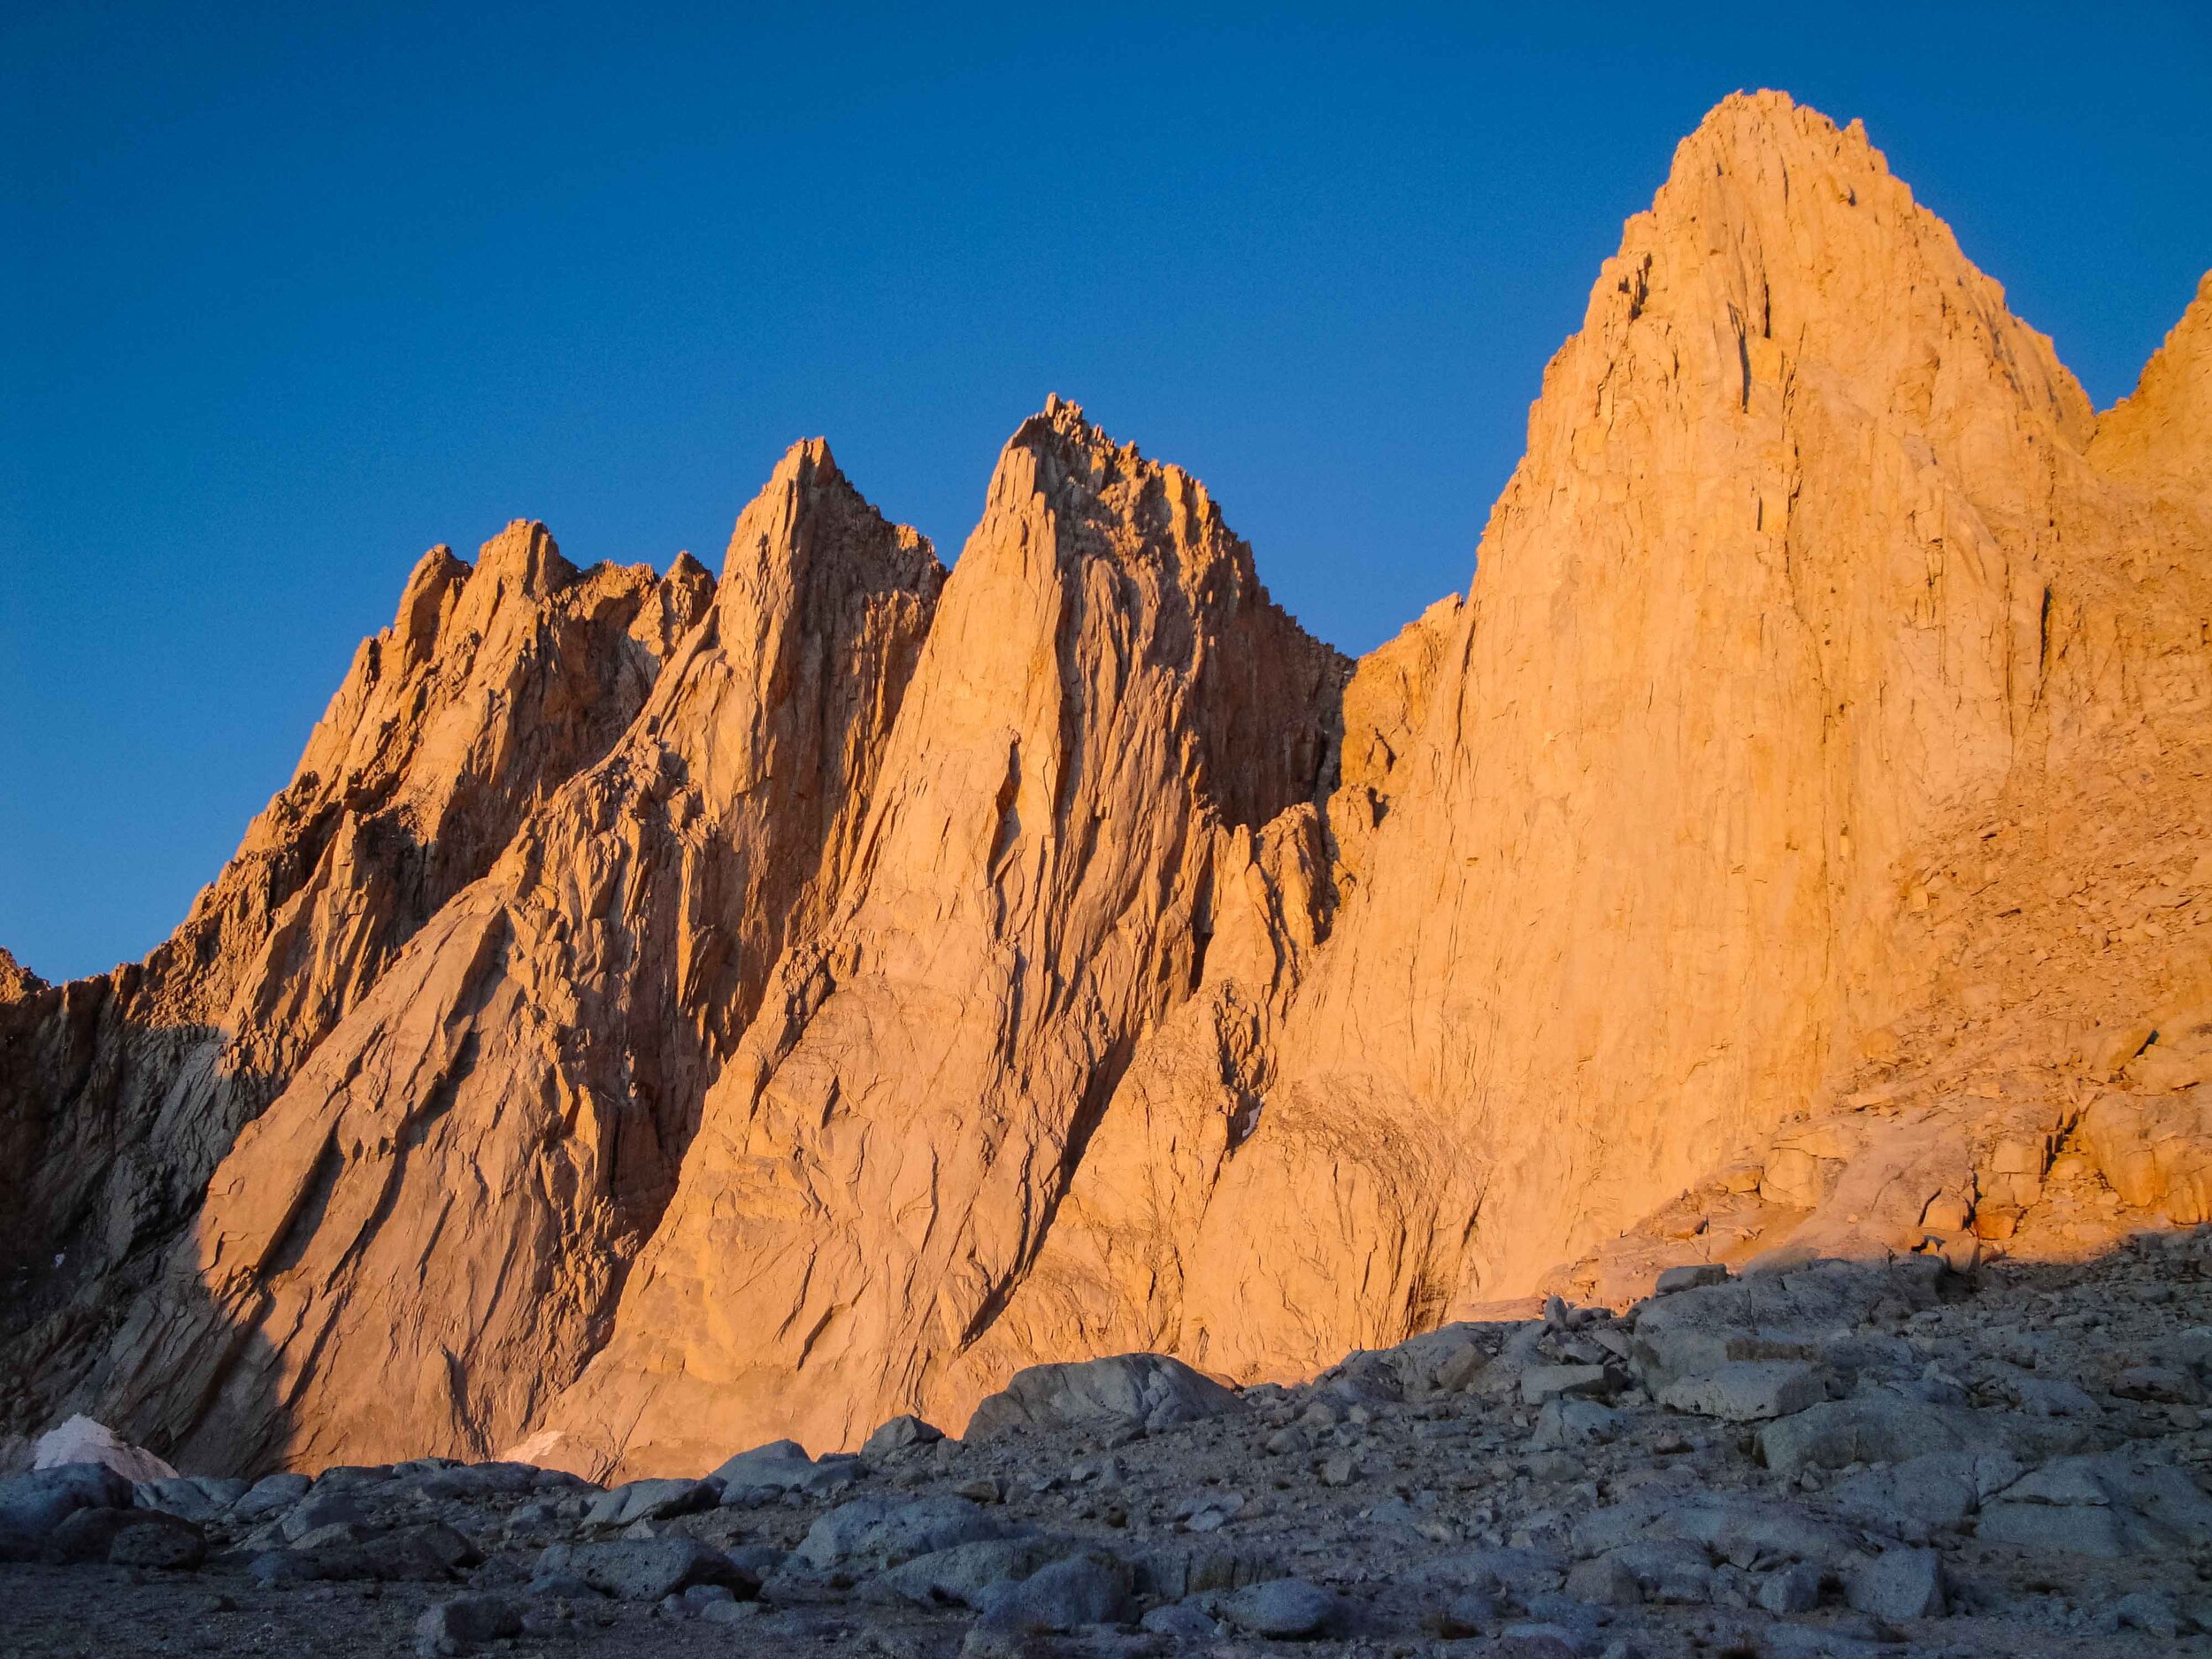 Morning Alpenglow on the East Face of Mount Whitney and Keeler Needle